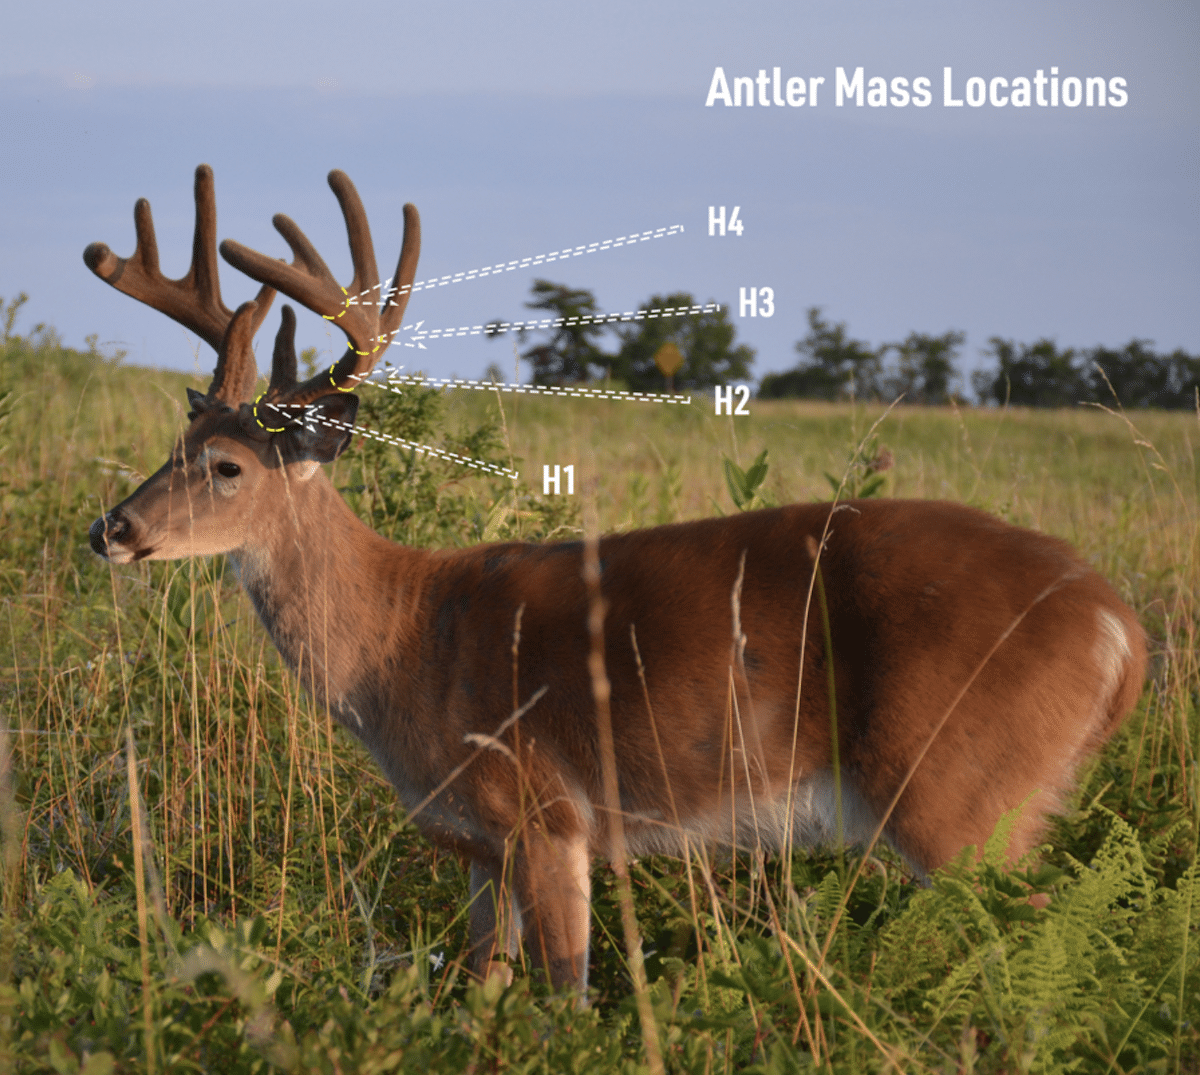 Here's a Guide To Scoring Your Whitetail's Rack